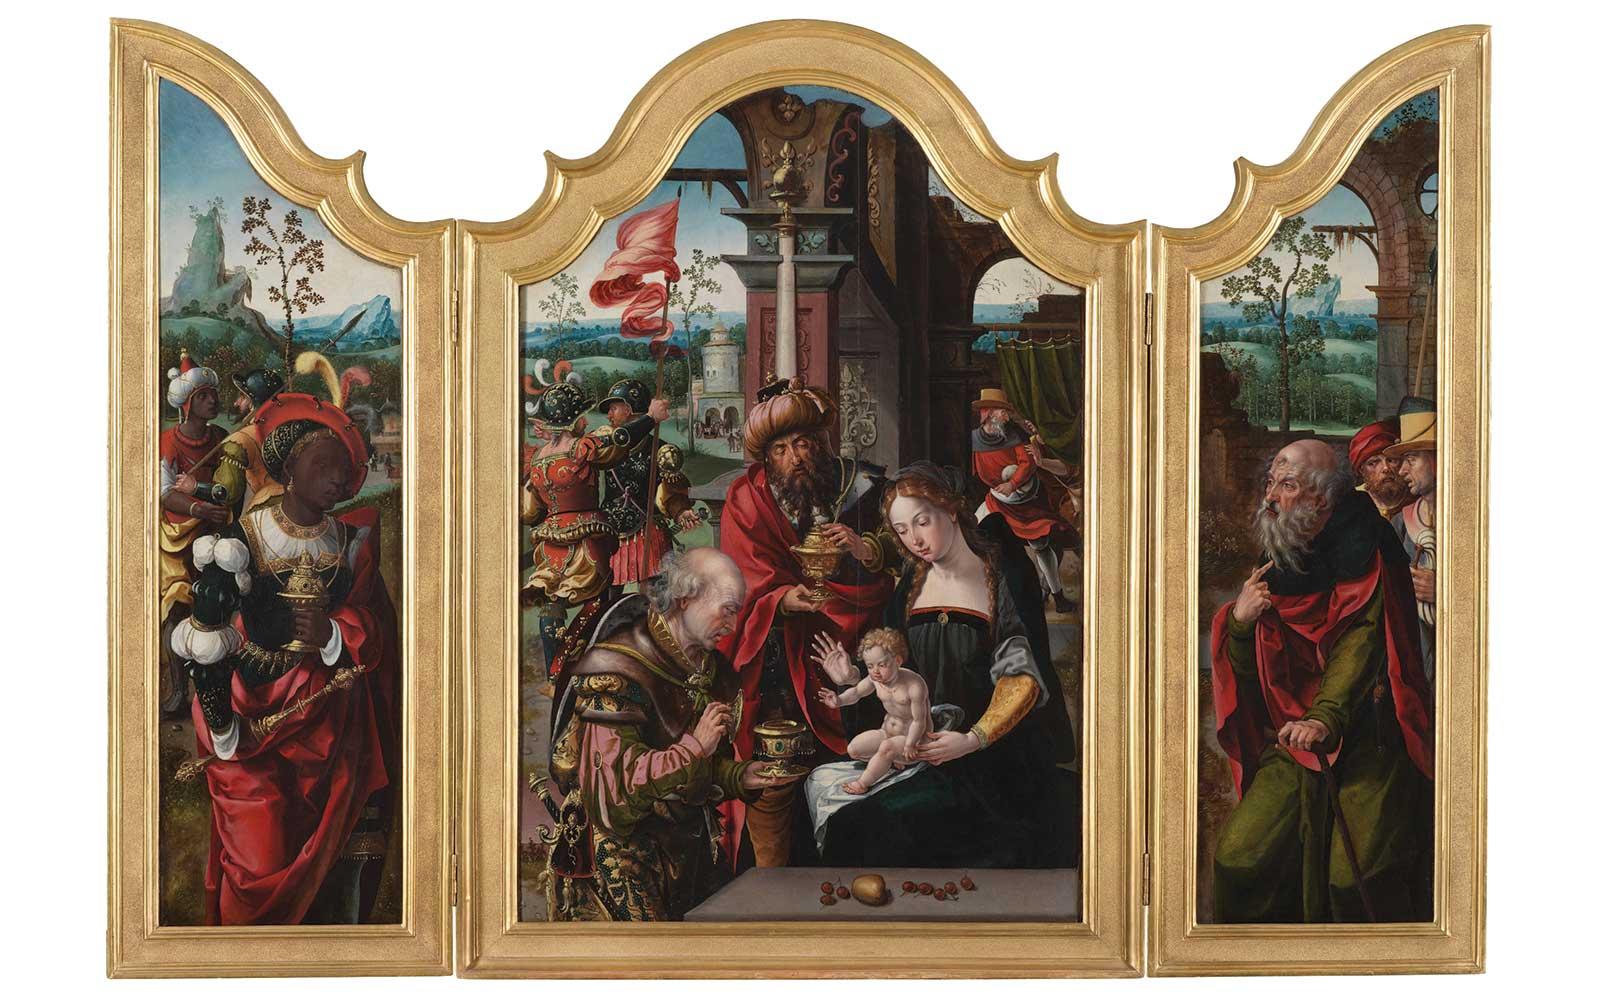 Pieter Coecke van Aelst, Triptych with the Adoration of the Magi, about 1530– 40. 